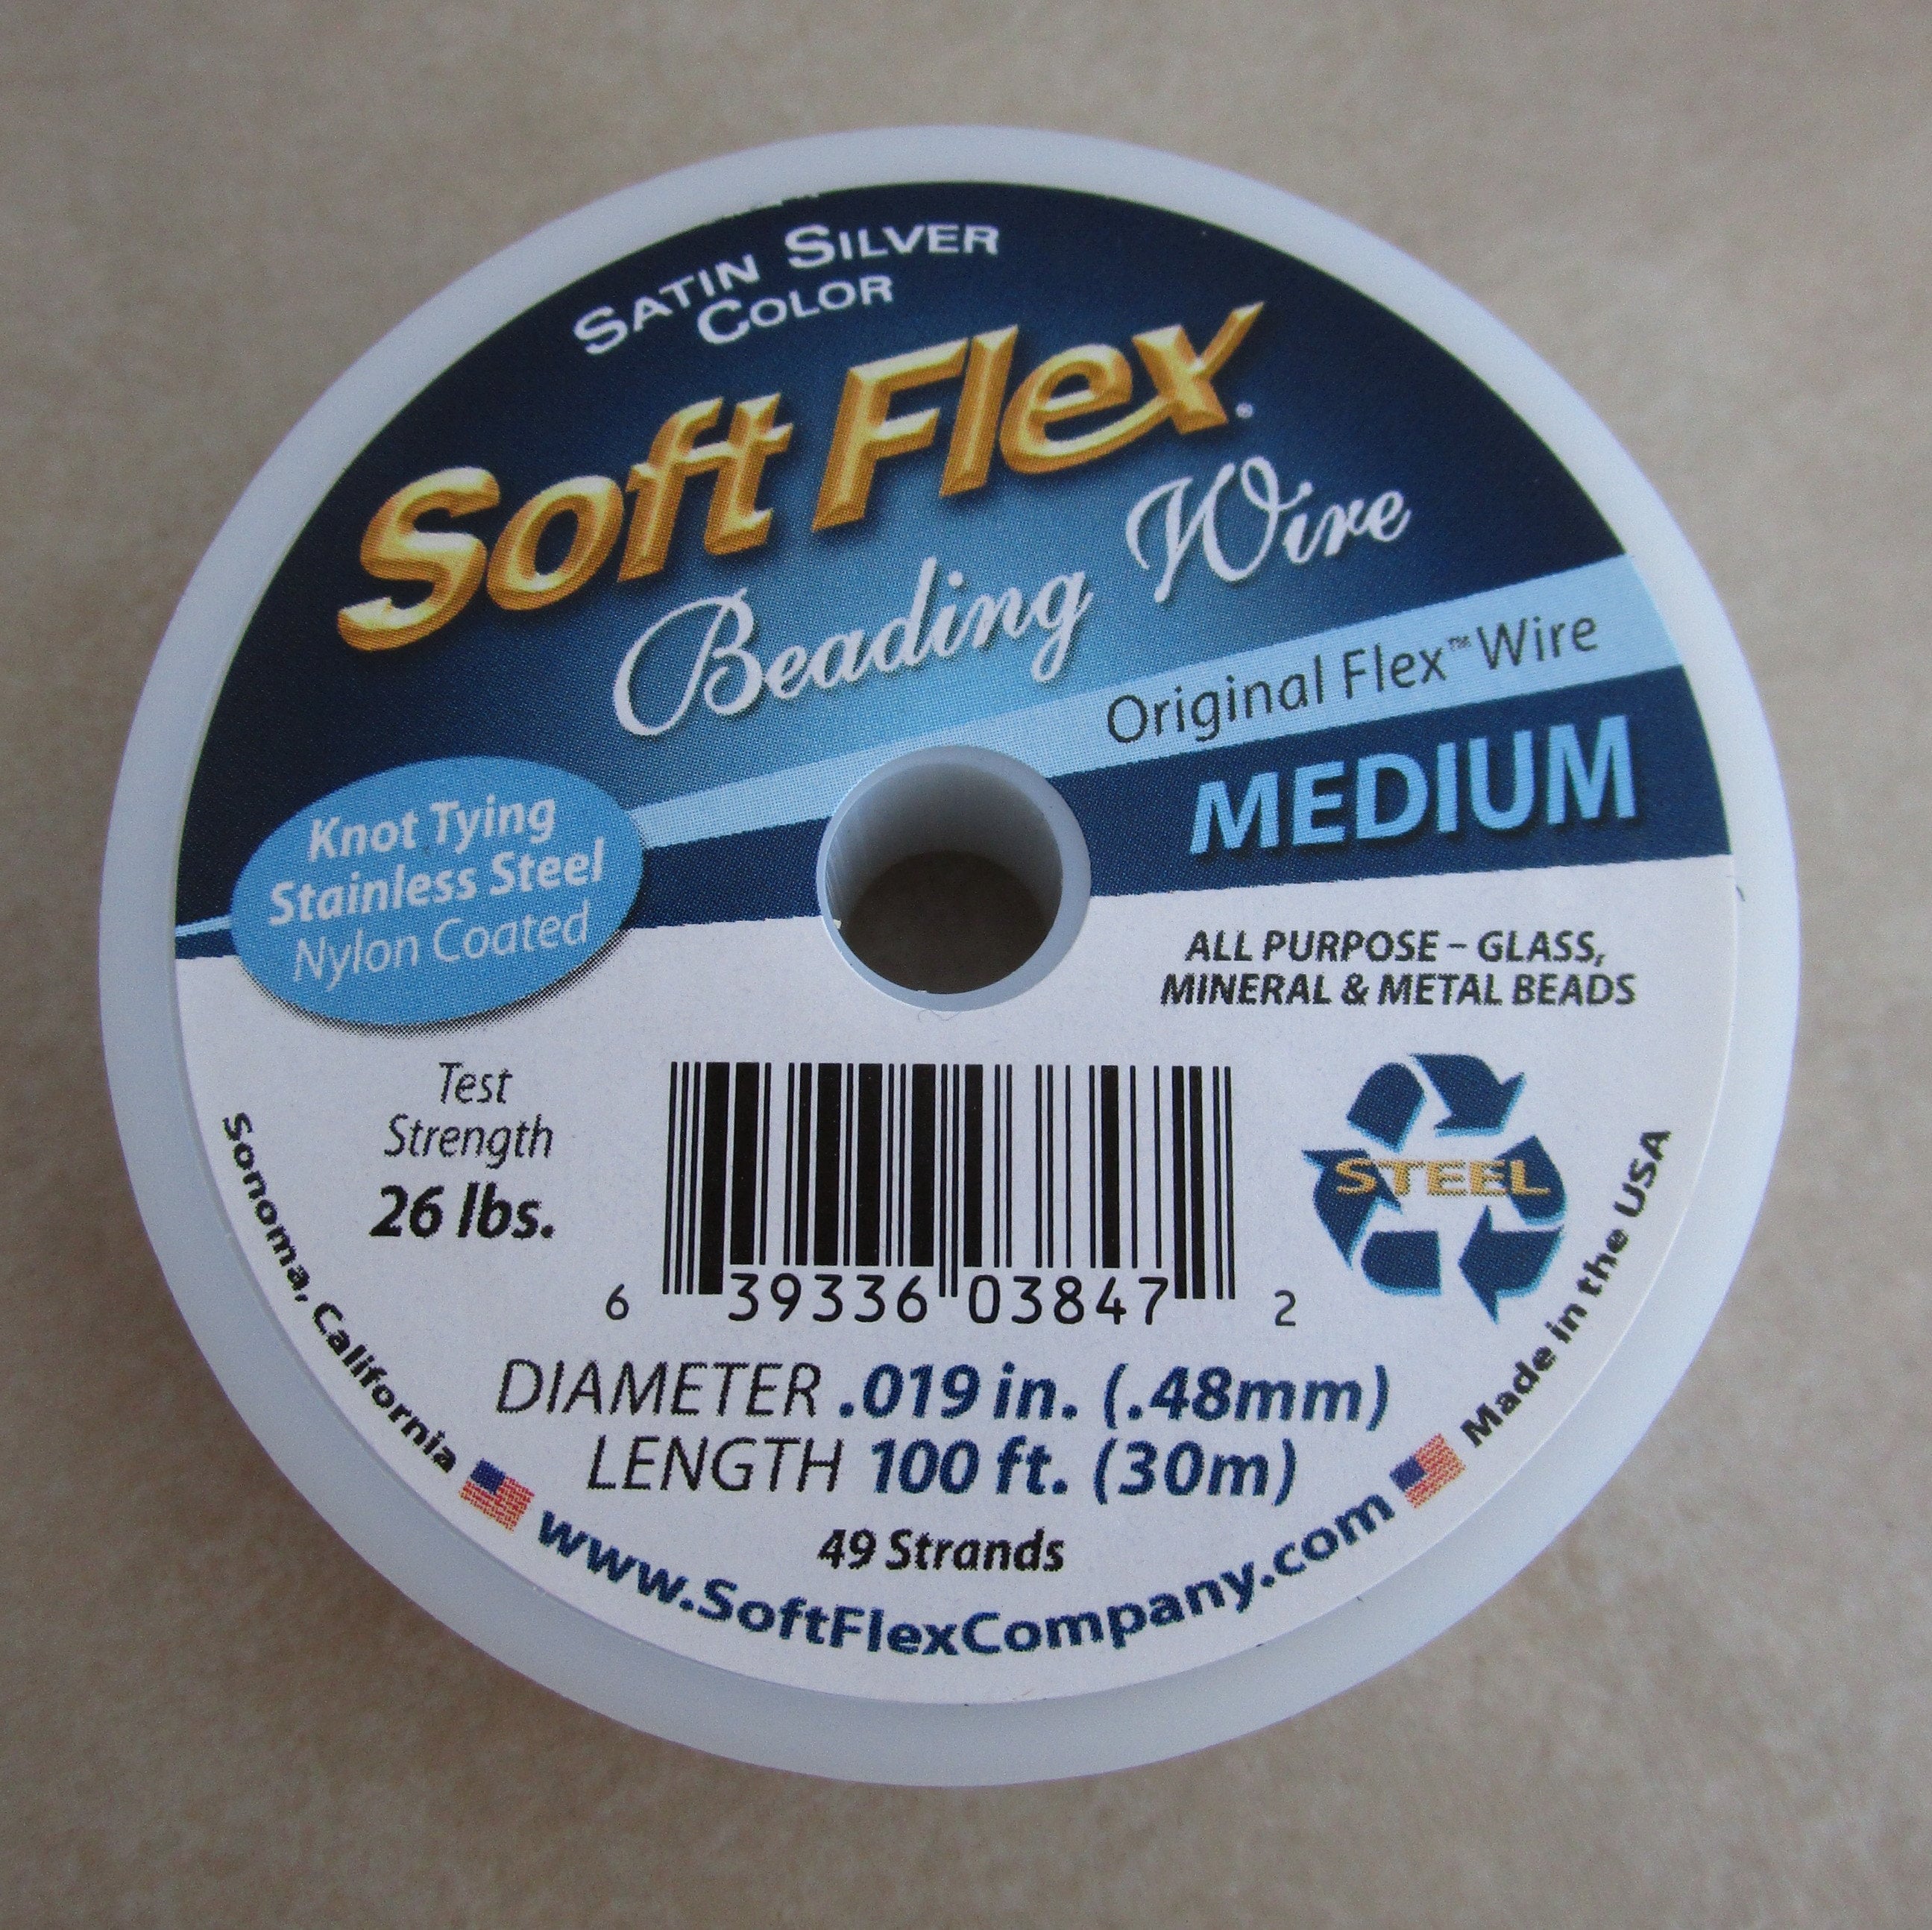 Soft Touch Black Very Fine Size Beading Wire, 100 Foot Spool